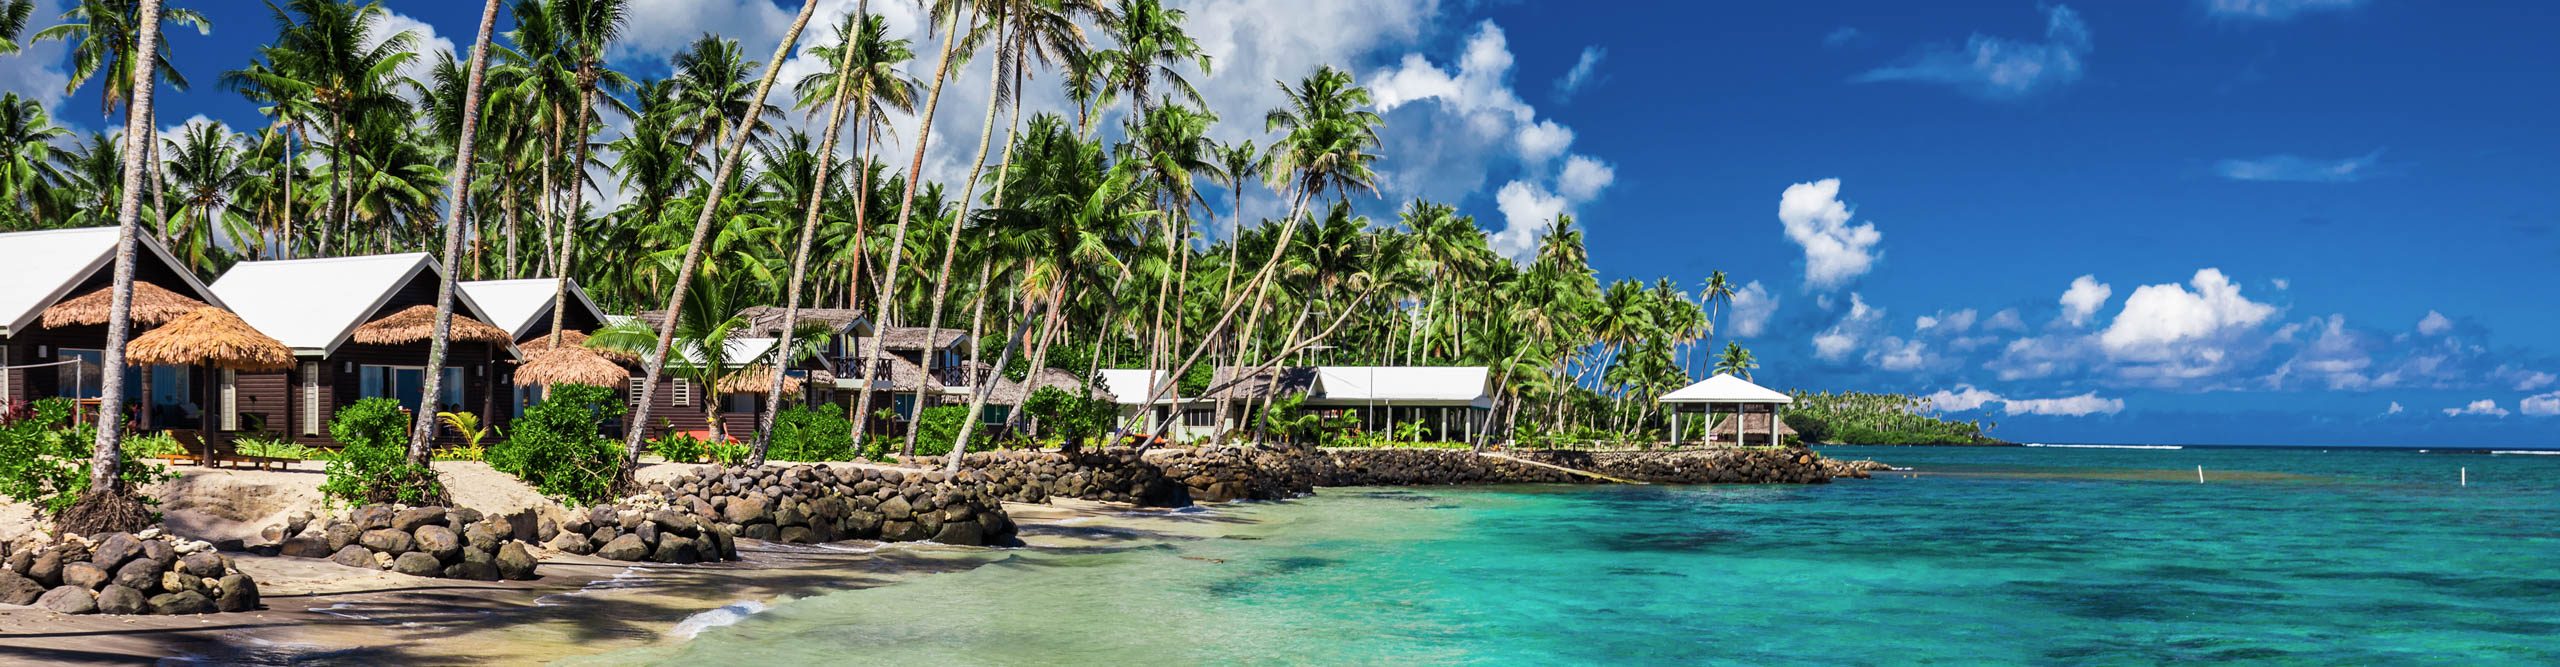 Tropical beach with with coconut palm trees, turquoise water and villas on Samoa Island, with 